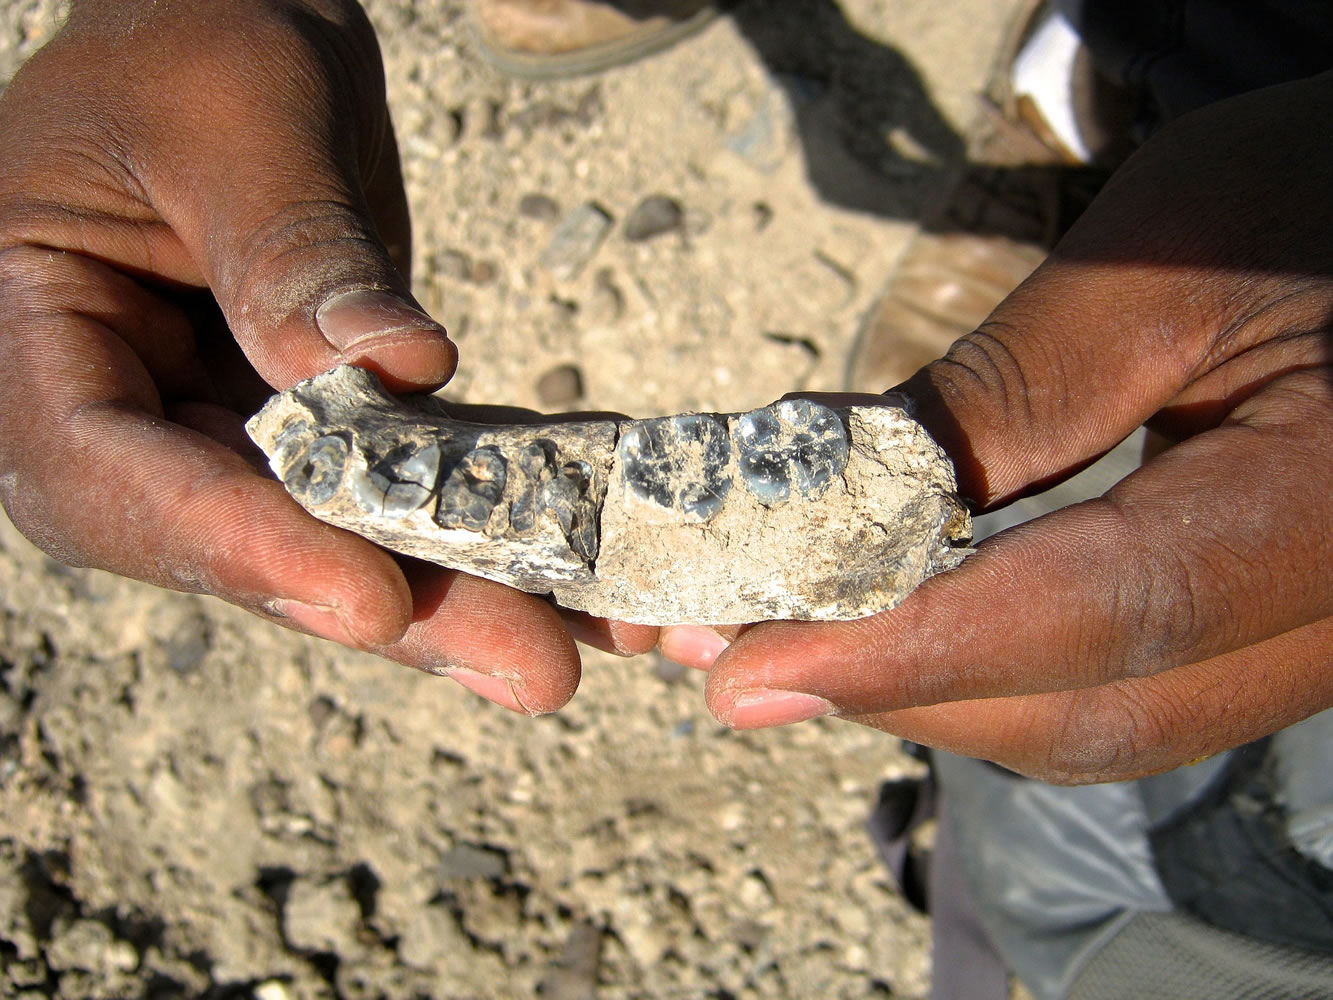 The LD 350-1 mandible is shown in 2013.